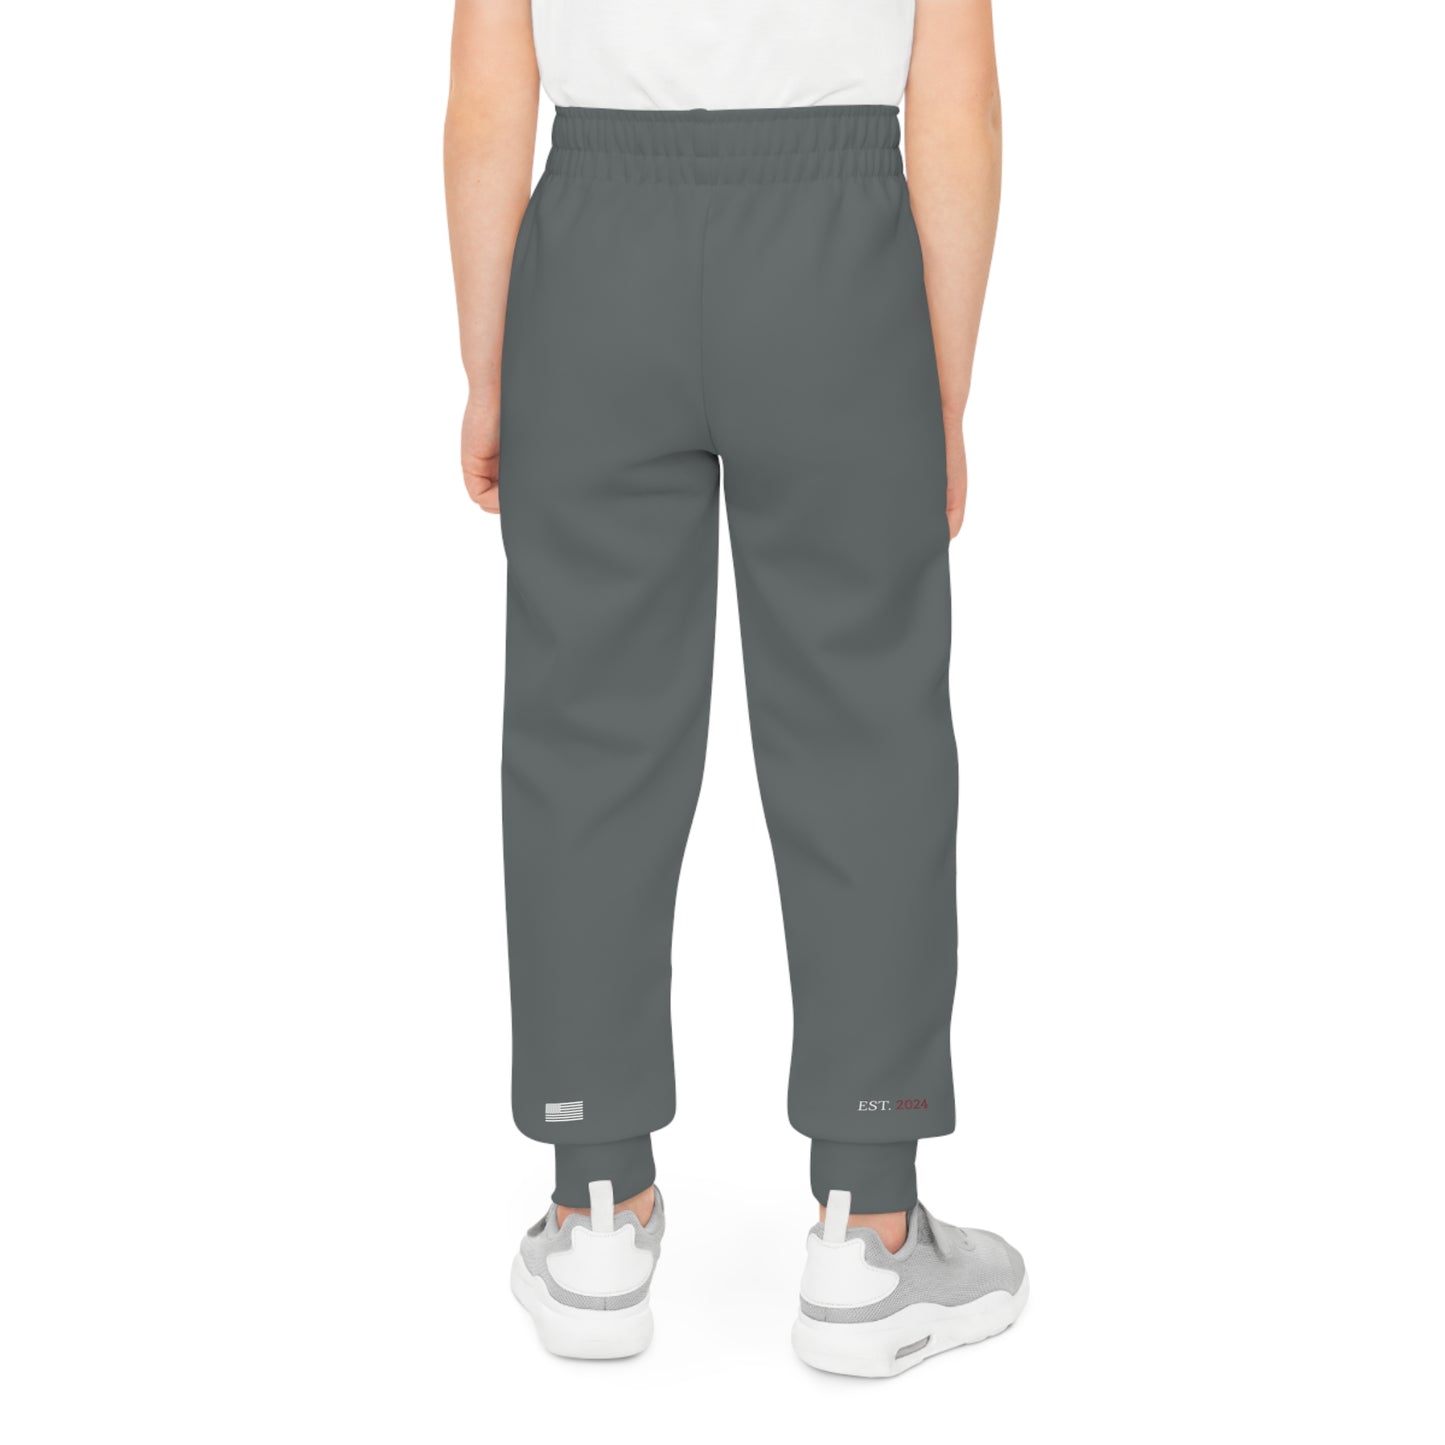 2Bdiscontinued. youth joggers drkgry